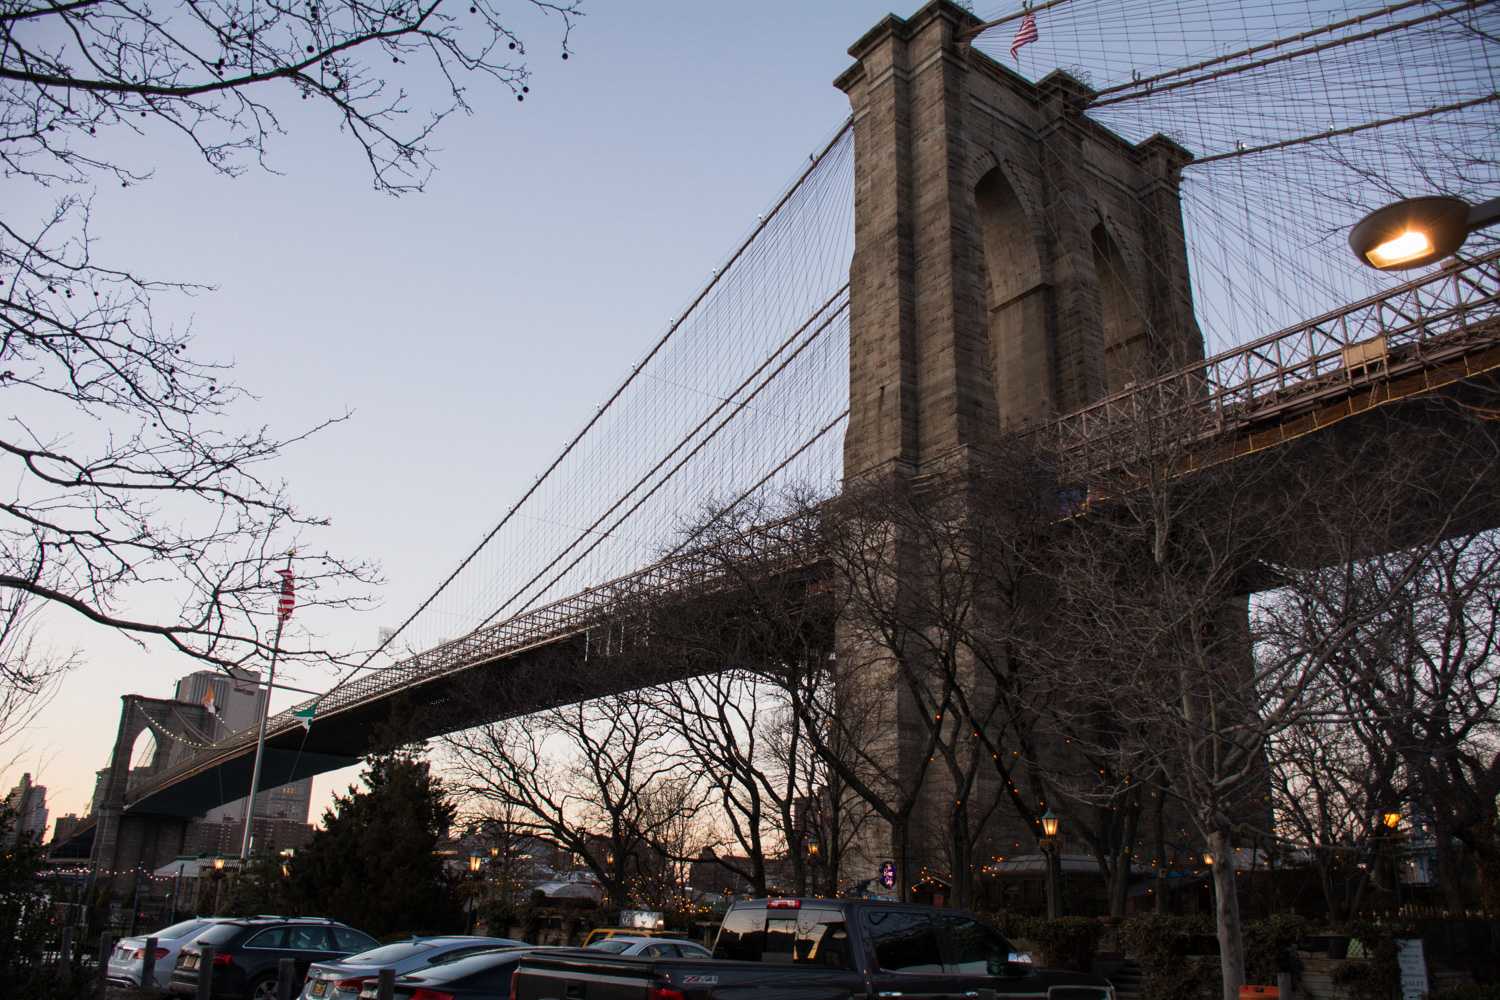 The Brooklyn Bridge — a cable-stayed/suspension bridge — is one of the oldest of its kind and has become a main attraction for tourists visiting the city.  It takes between 30 minutes and an hour to walk its expanse one way depending on pace.